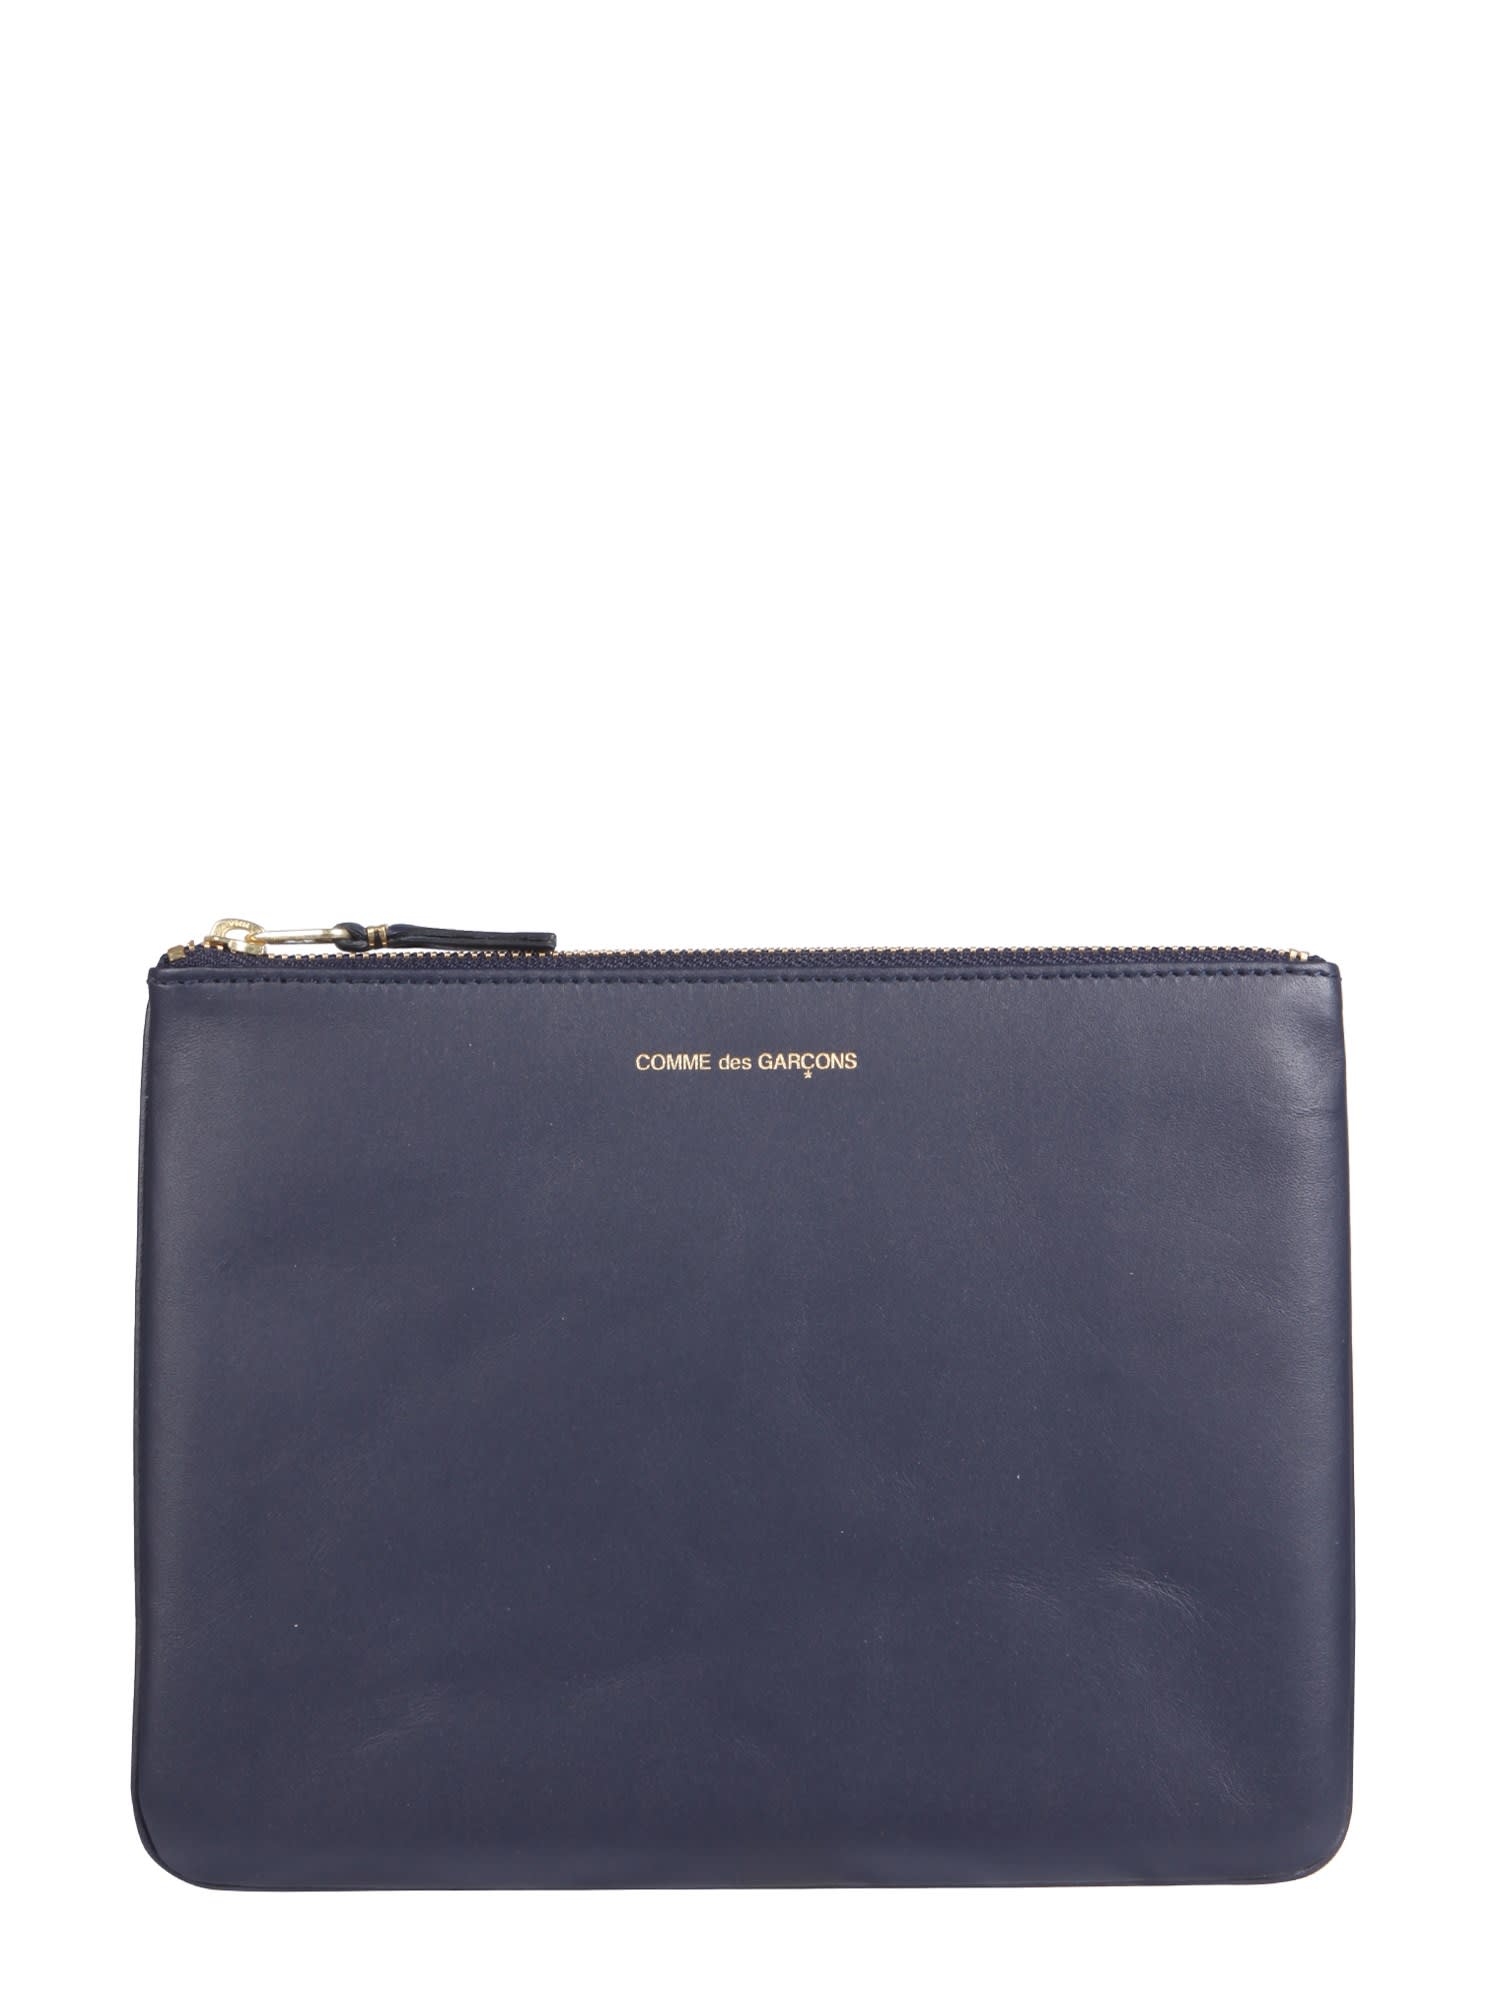 Comme Des Garçons Leather Pouch In Navy Navy